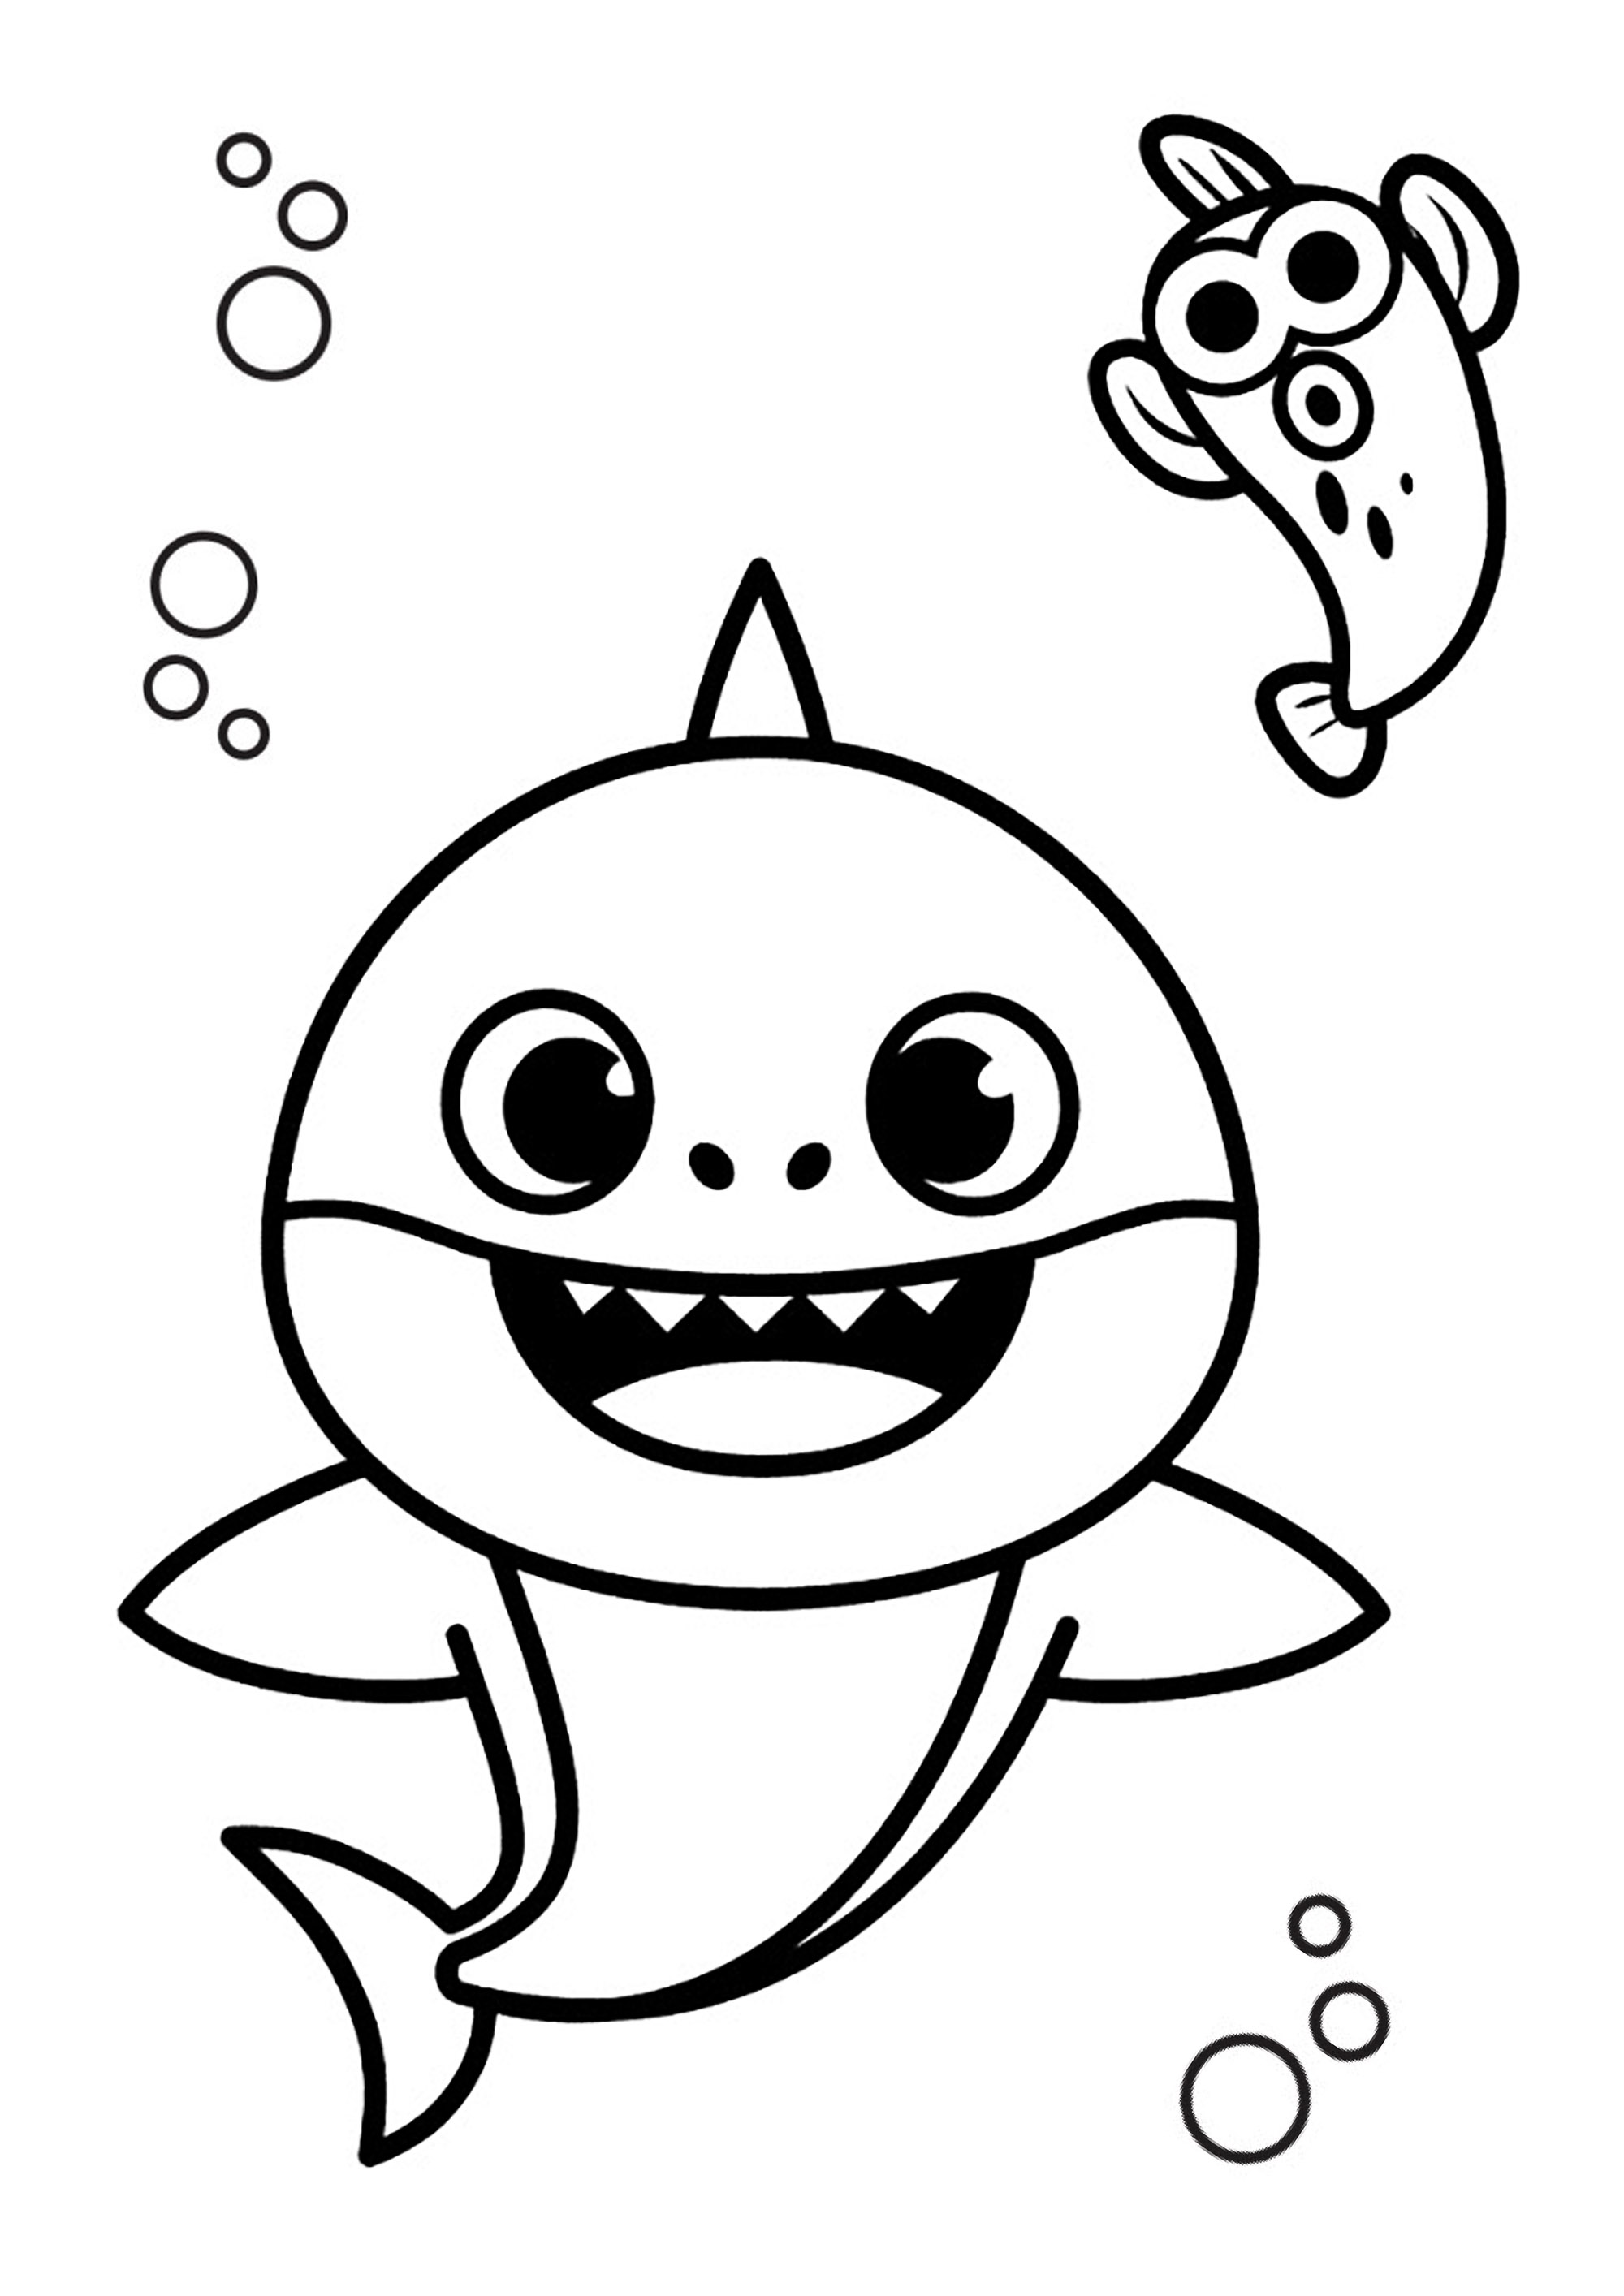 Baby Shark and a fish friend, with bubbles - Baby Shark Kids Coloring Pages